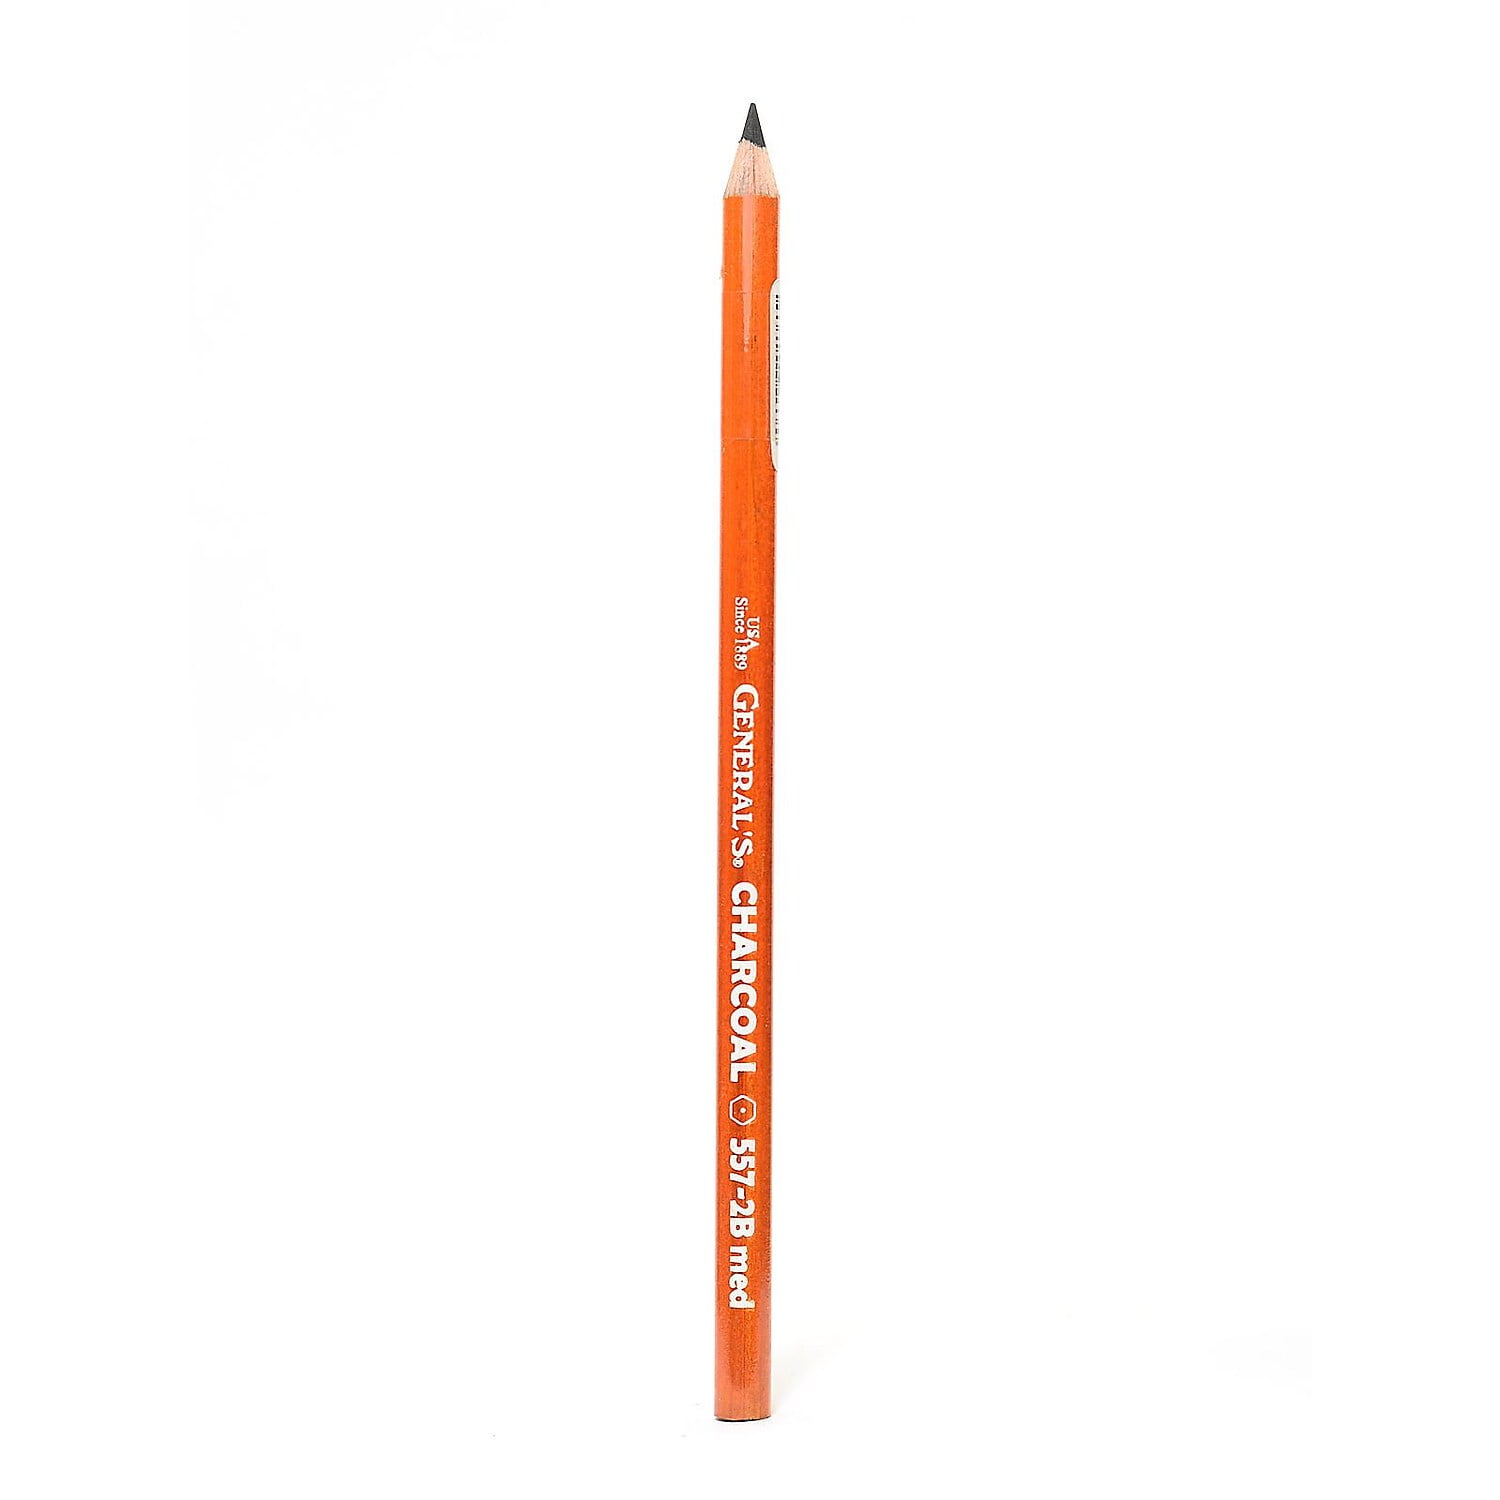 Faber-Castell 2B Hardness Pencils & Charcoal for sale